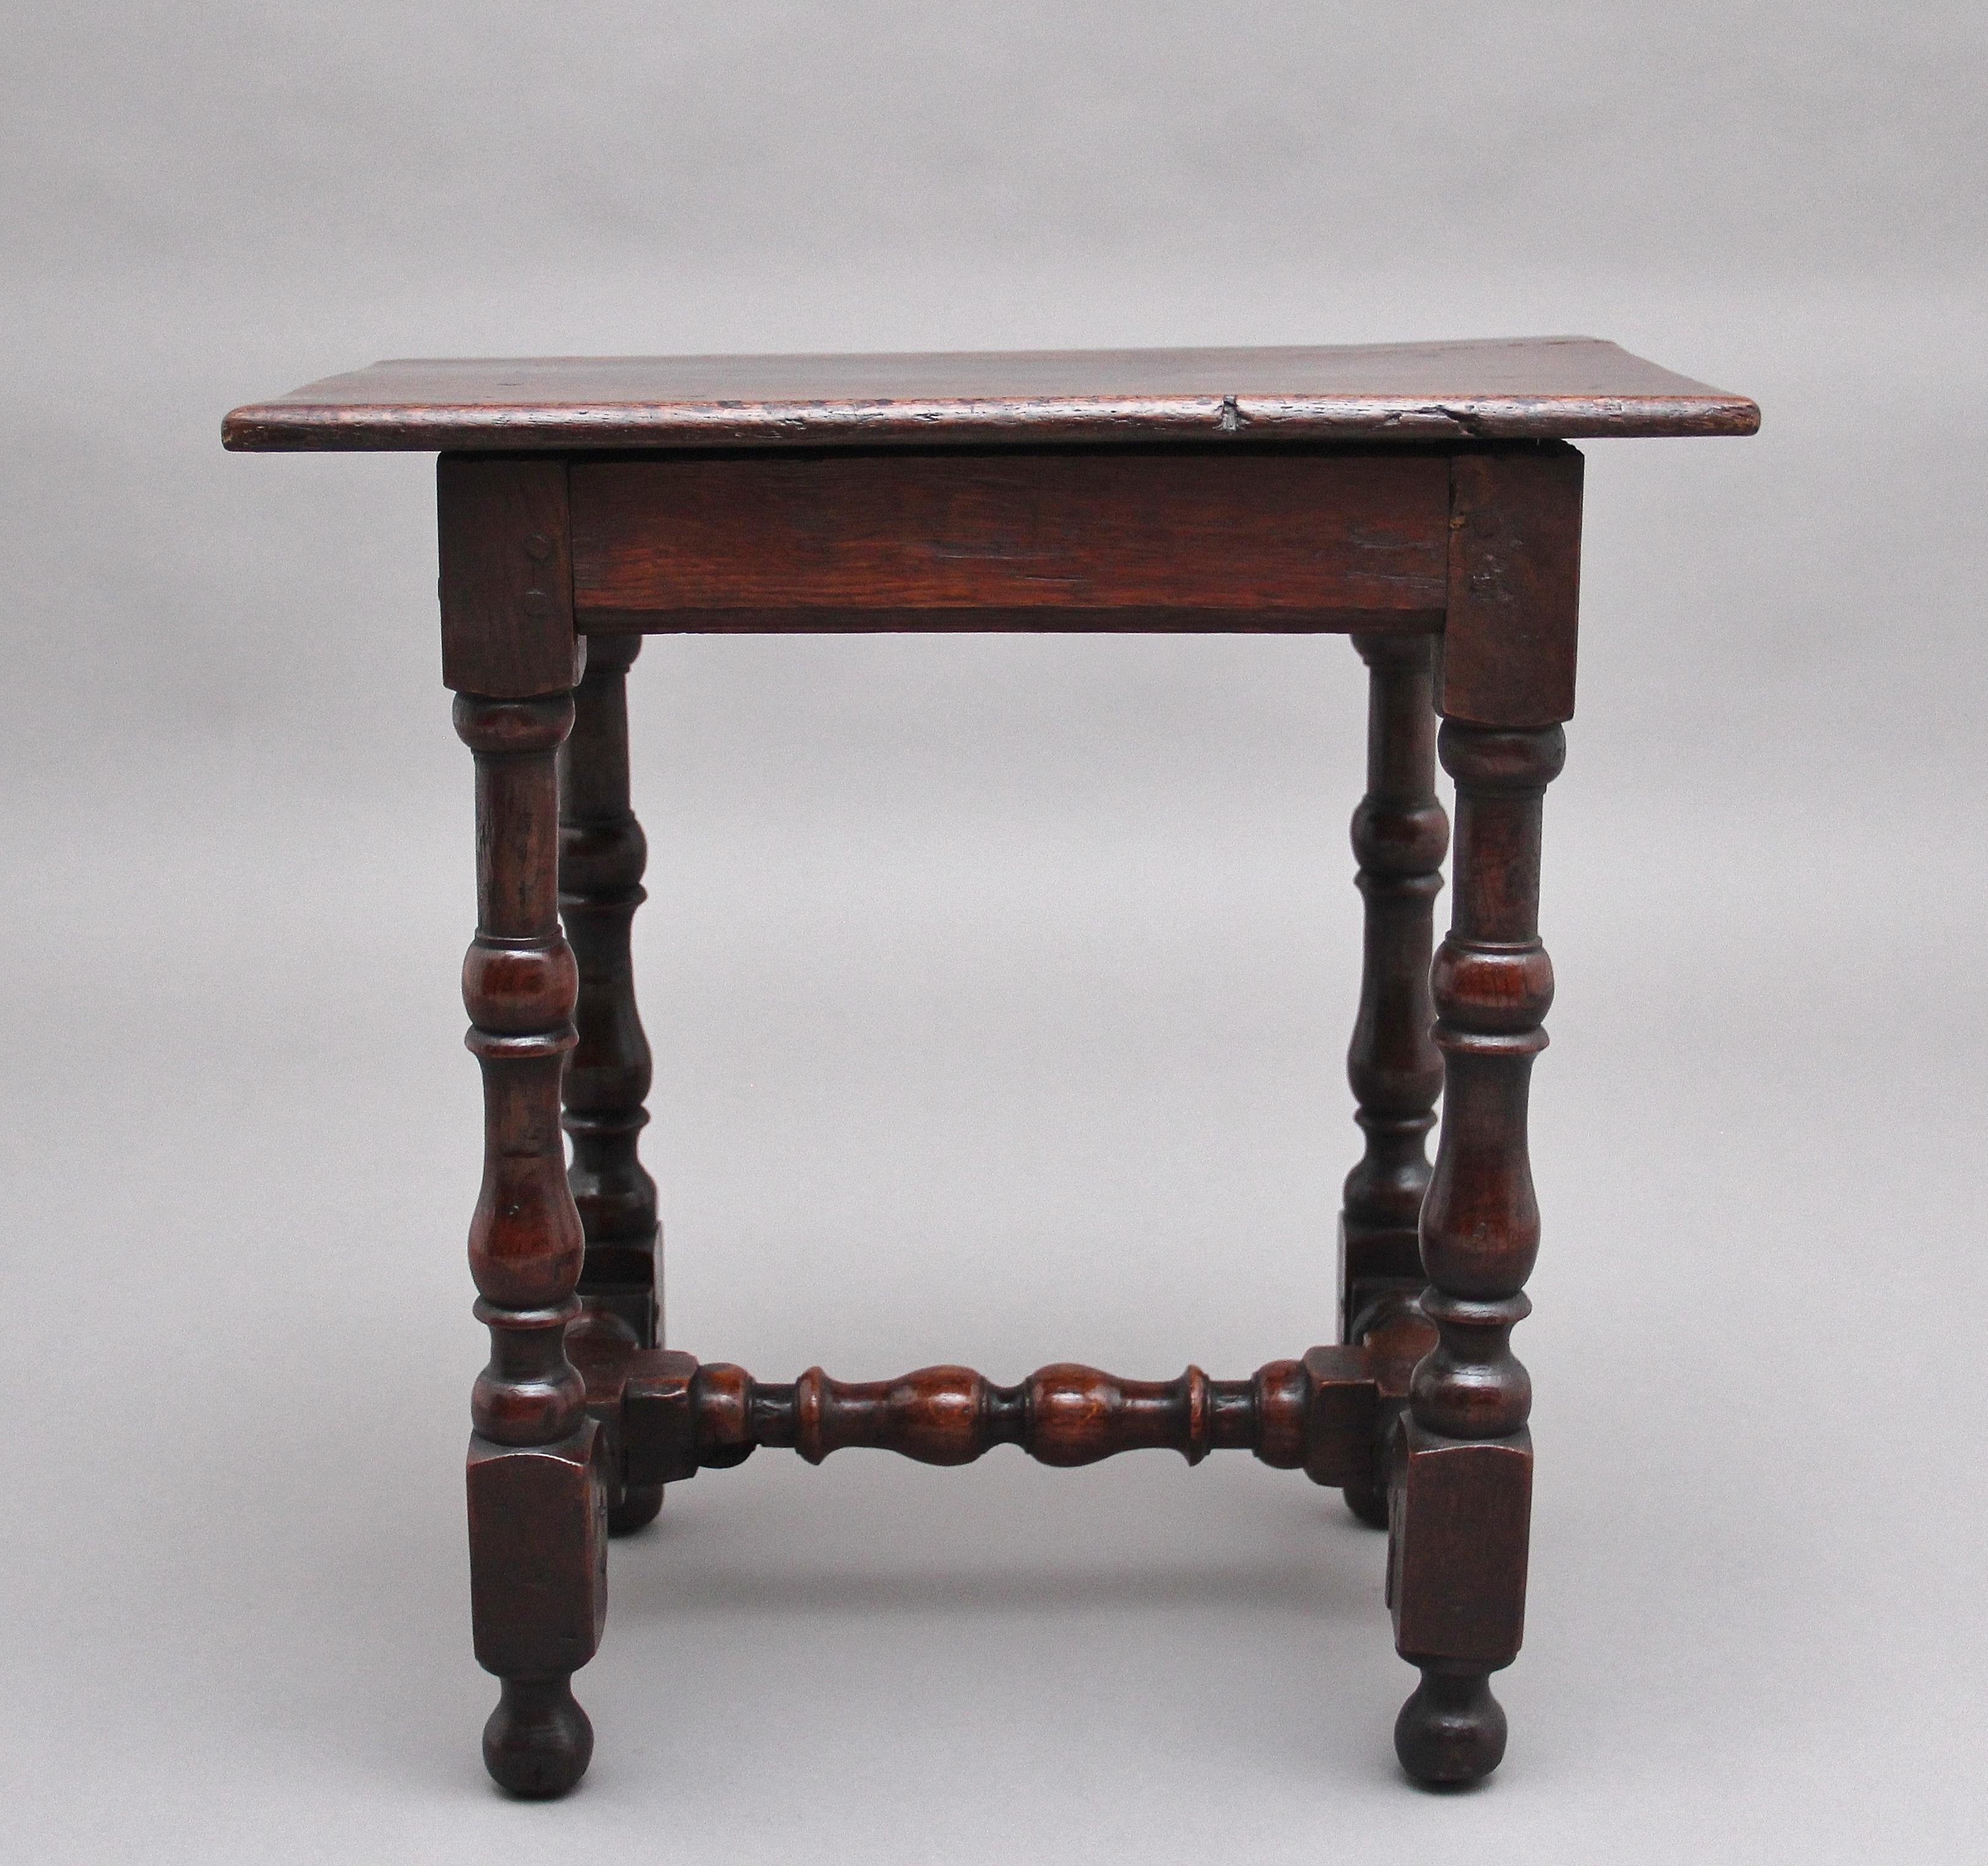 Early 18th century oak stool, the rectangular solid rustic top above a frieze with a moulded edge, supported on four turned legs united a block and turned stretcher. Circa 1740.